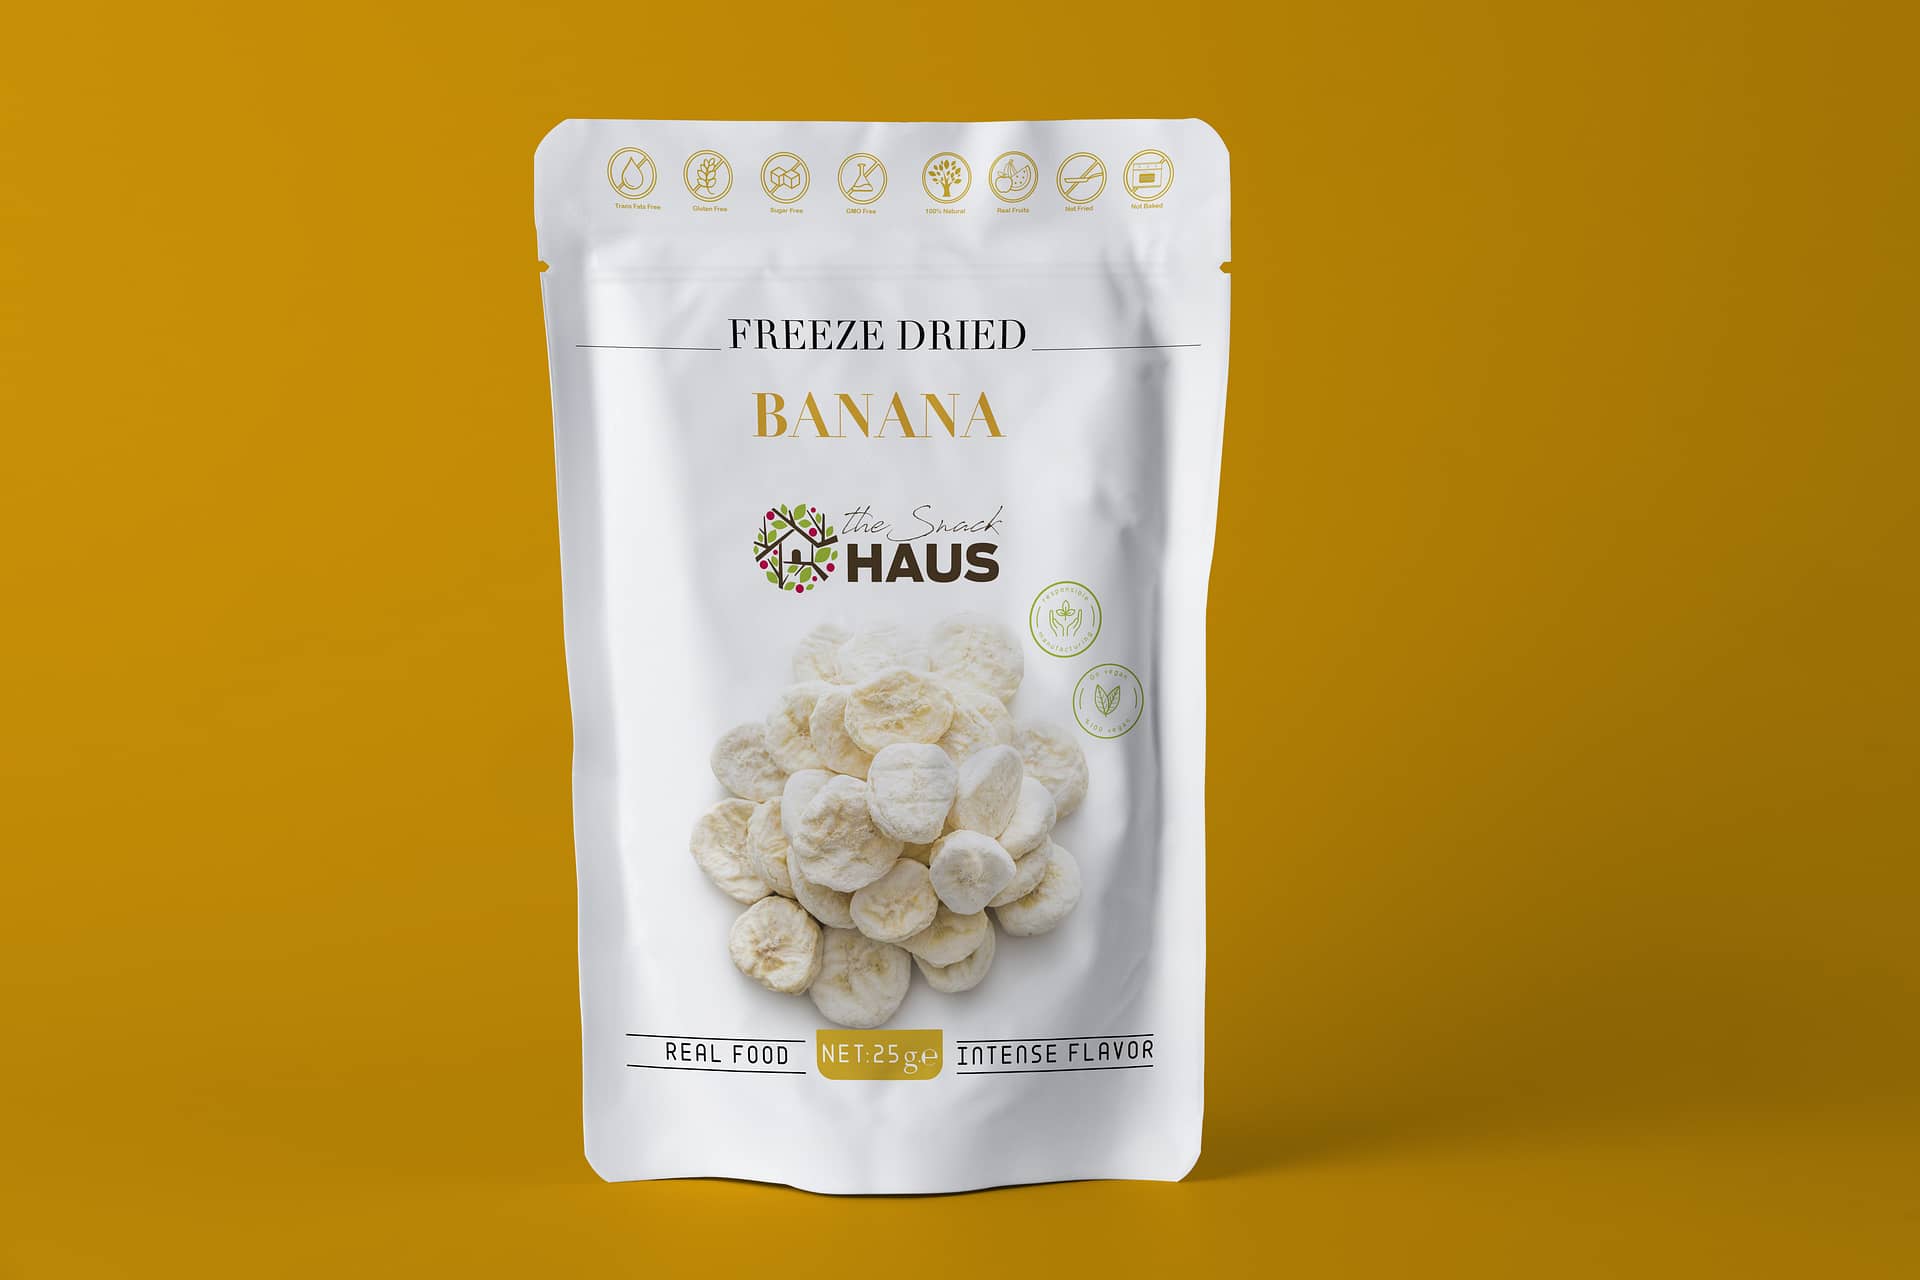 The Snack HAUS Freeze Dried Banana